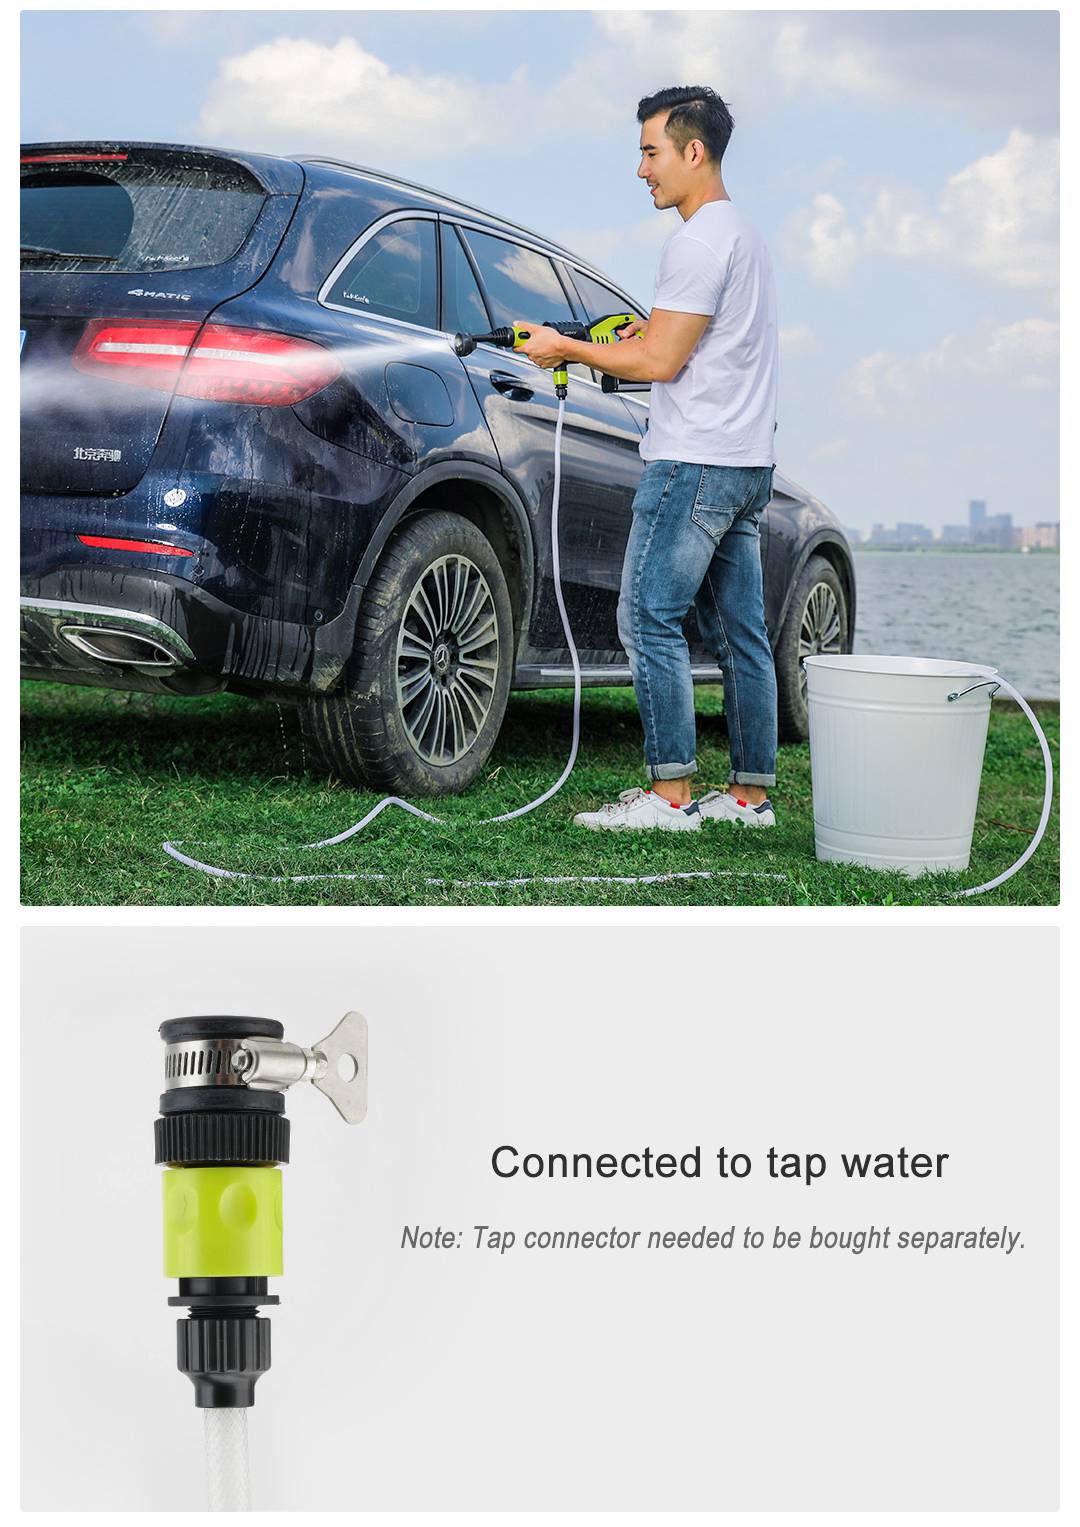 Xiaomi JIMMY JW31 Lightweight Cordless Pressure Washer Self-priming Faucet Long Cleaning Lance Eco Energy Saving Mode Portable Cleaner Global Version - Black